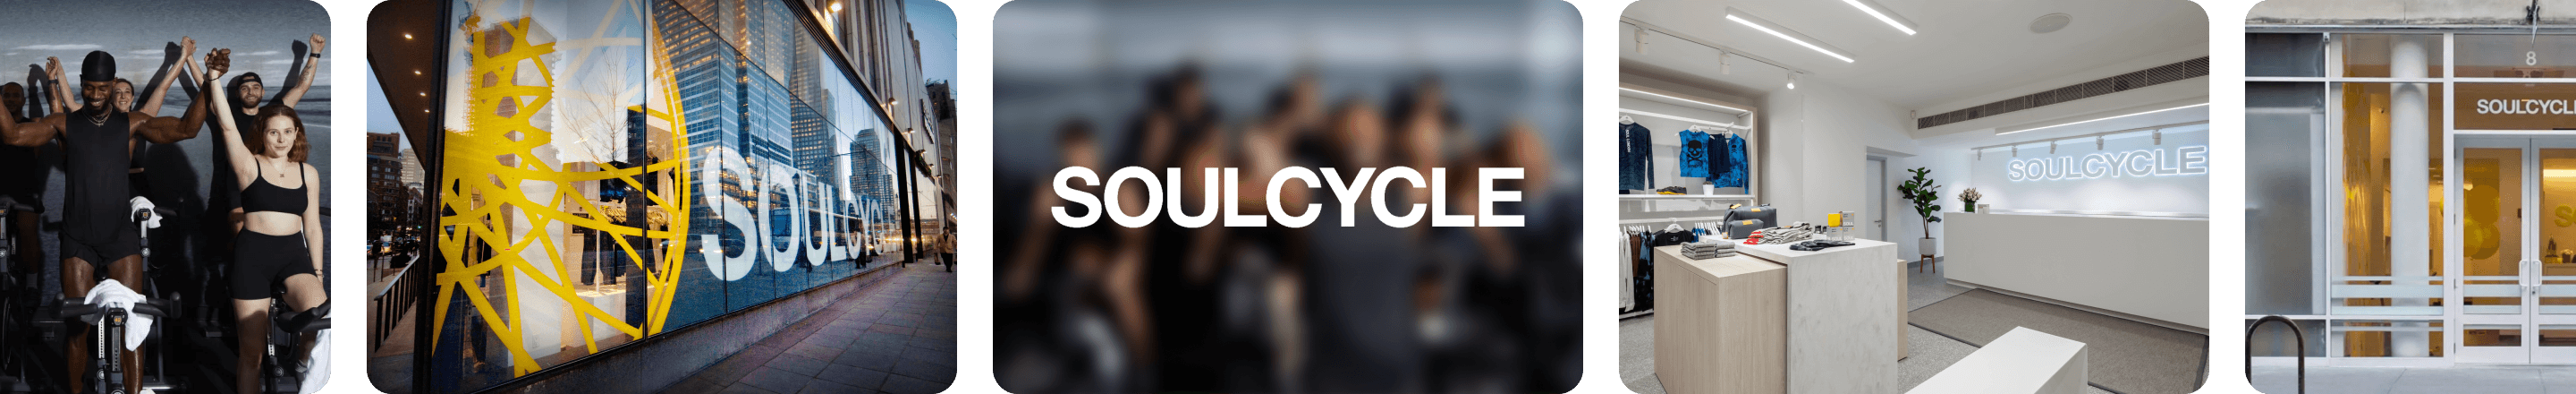 Soulcycle-collage